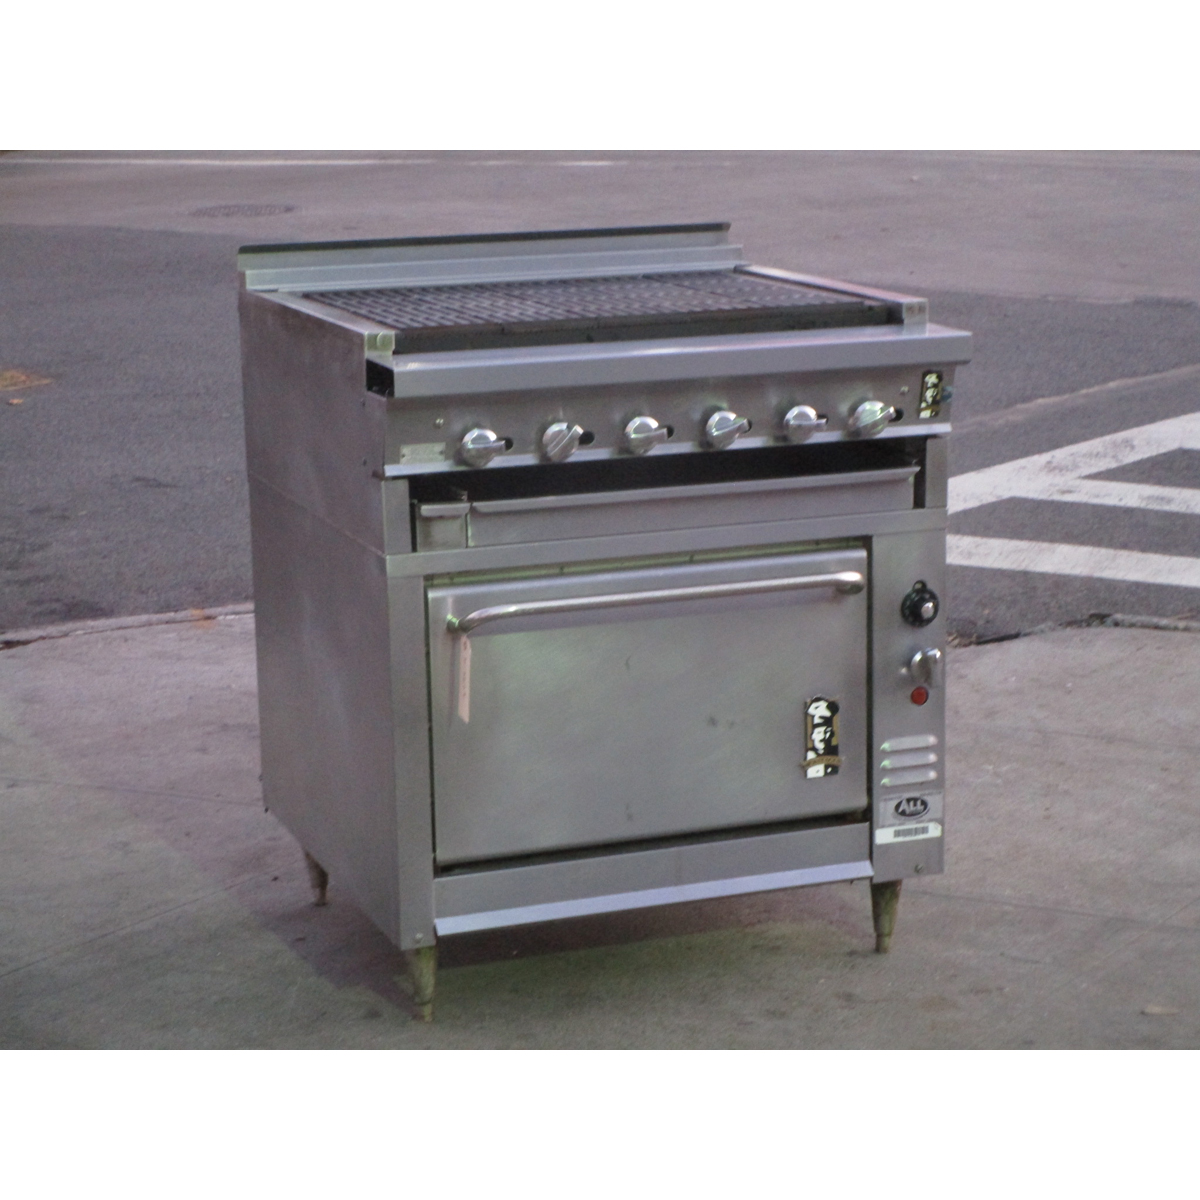 Montague 136XLB/UFLC-36R Oven & Charbroiler Grill, Used Very Good Condition